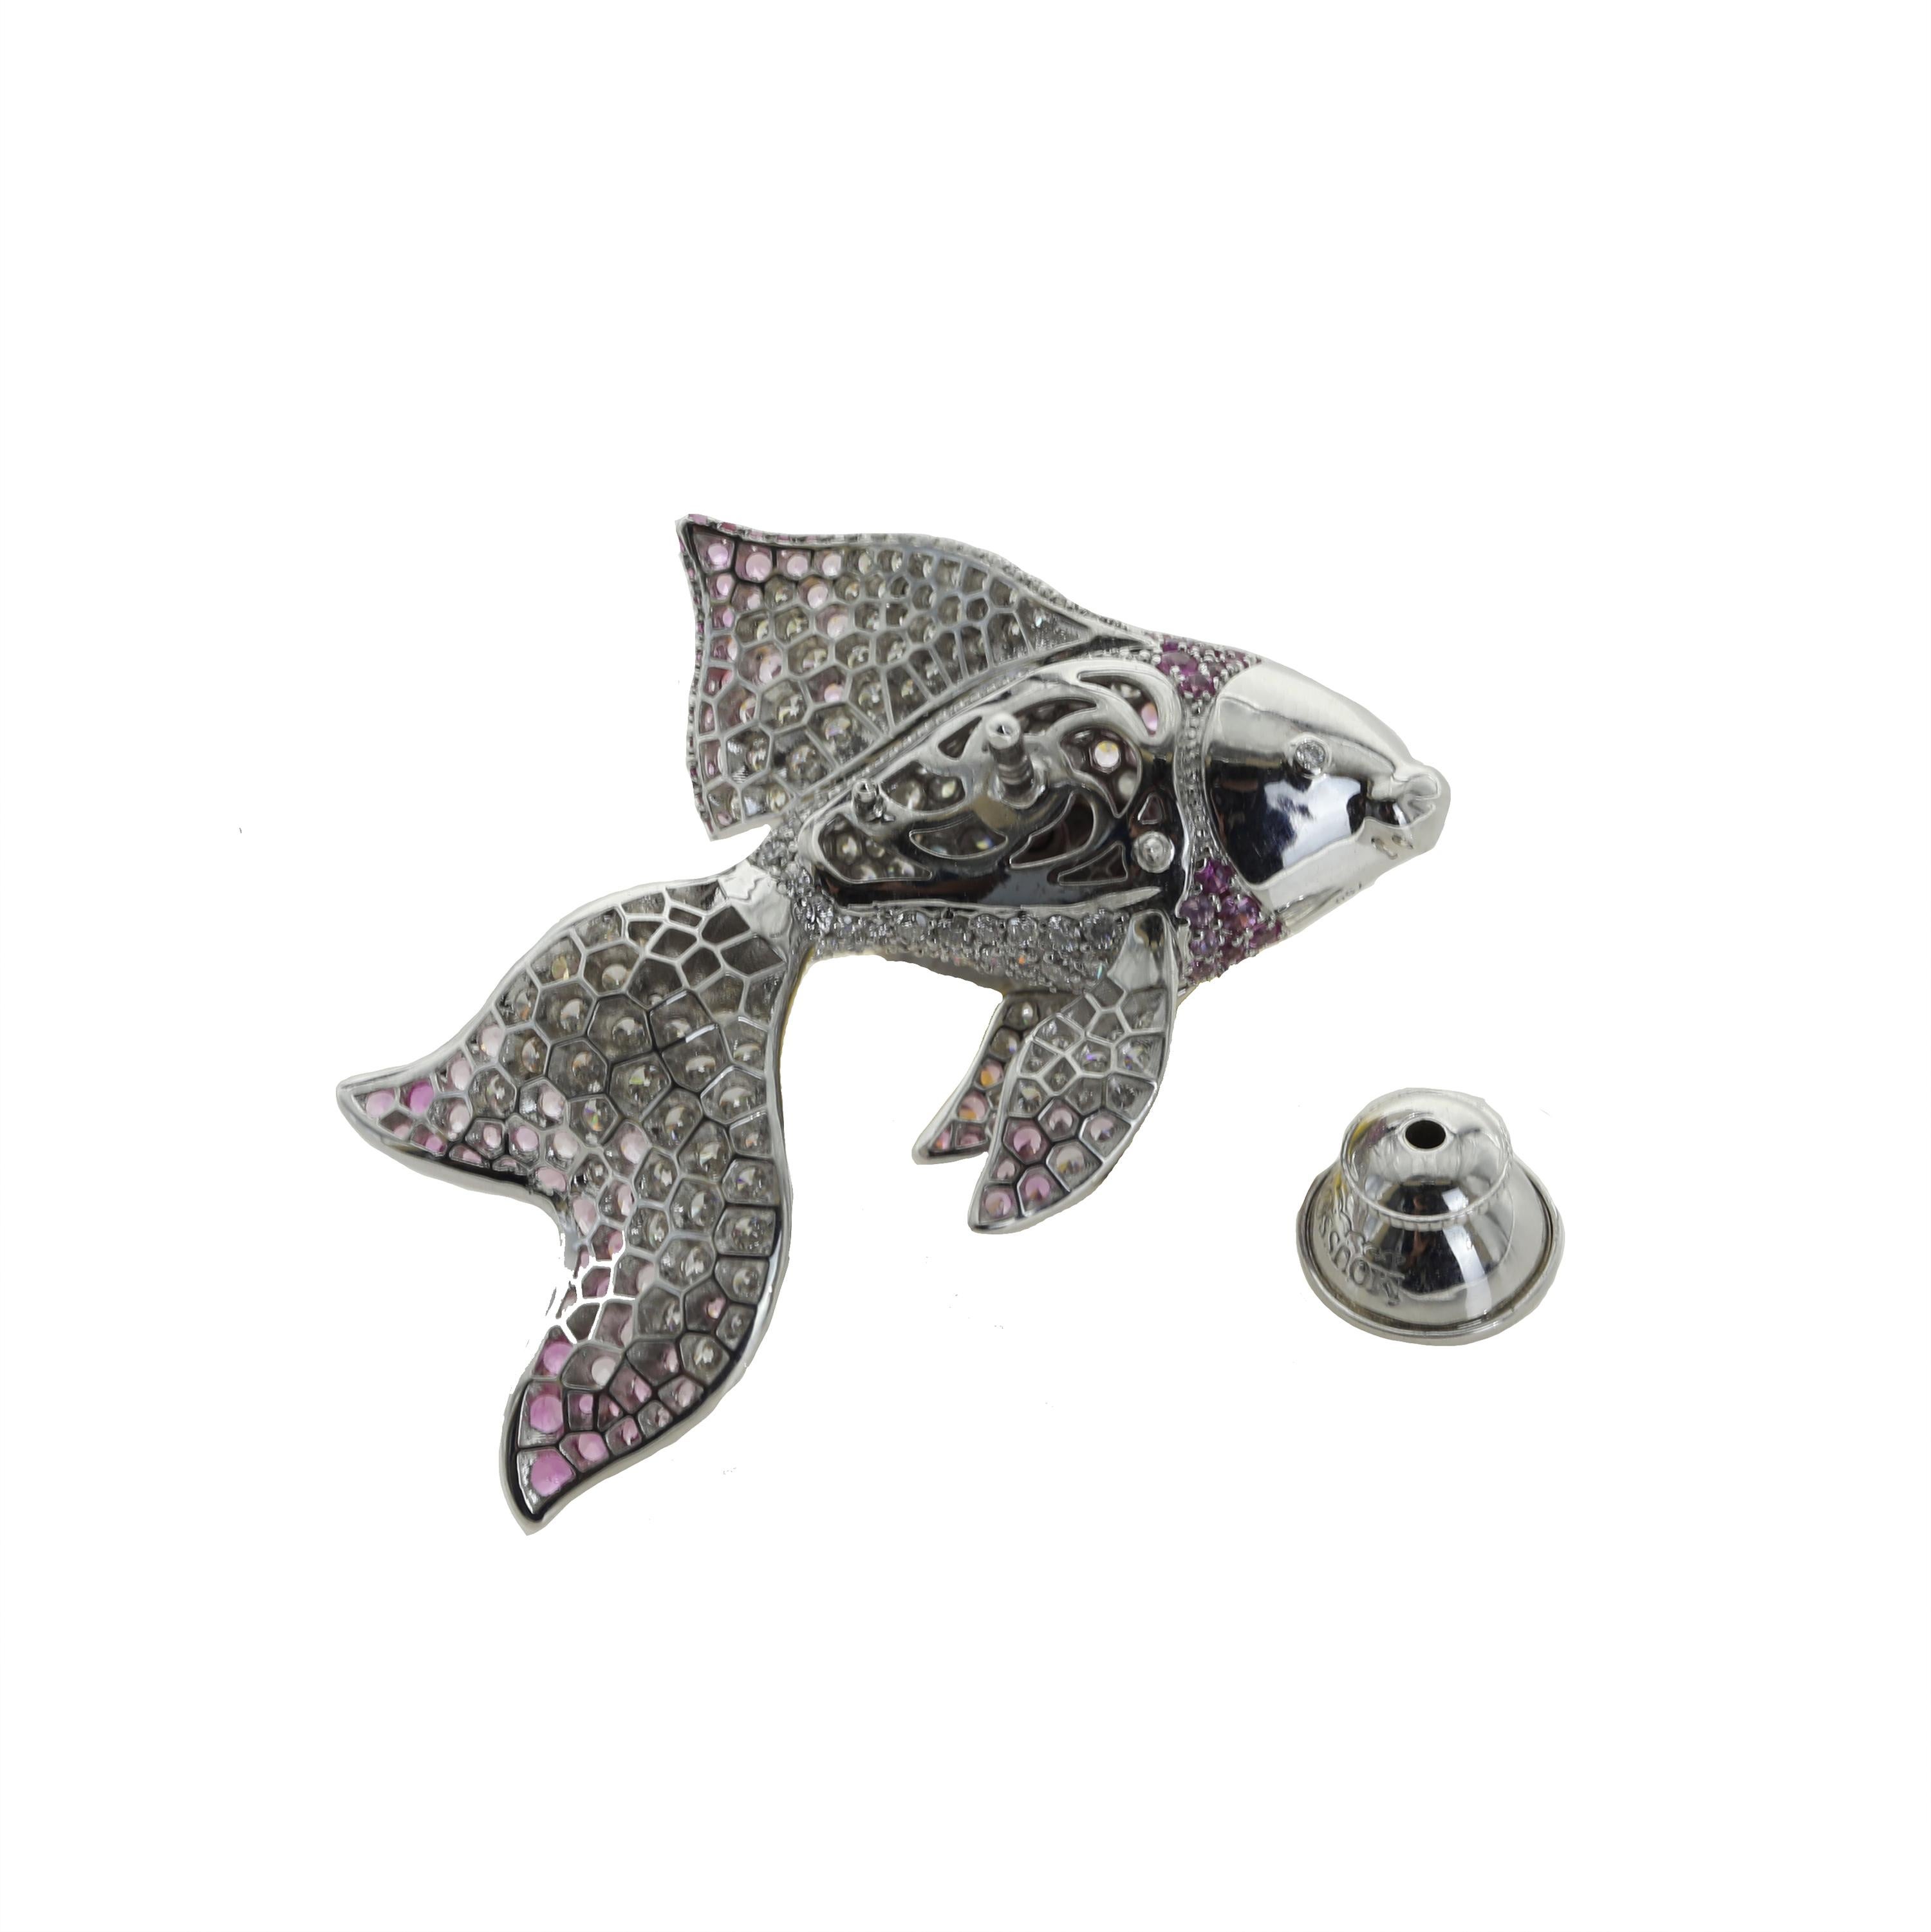 Diamond Pink Sapphire 18 Karat White Gold Golden Fish Brooch
The fins are moving.

37.3x26x9 mm
7.72 gm